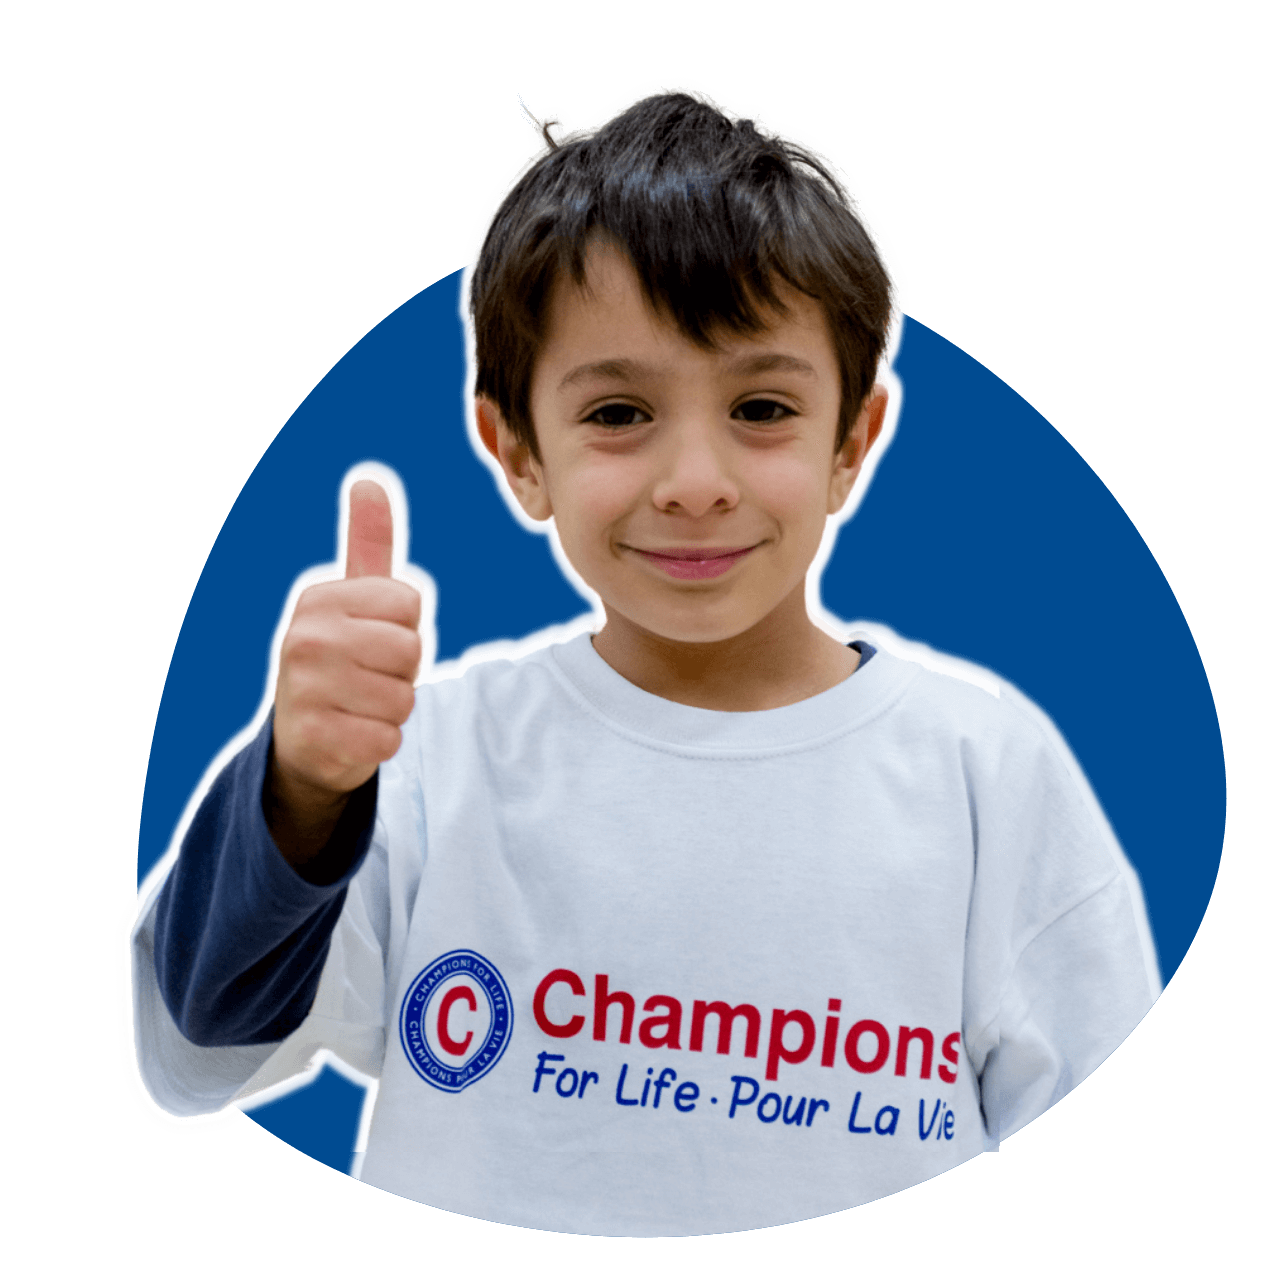 Make a donation to the Champions for Life Foundation